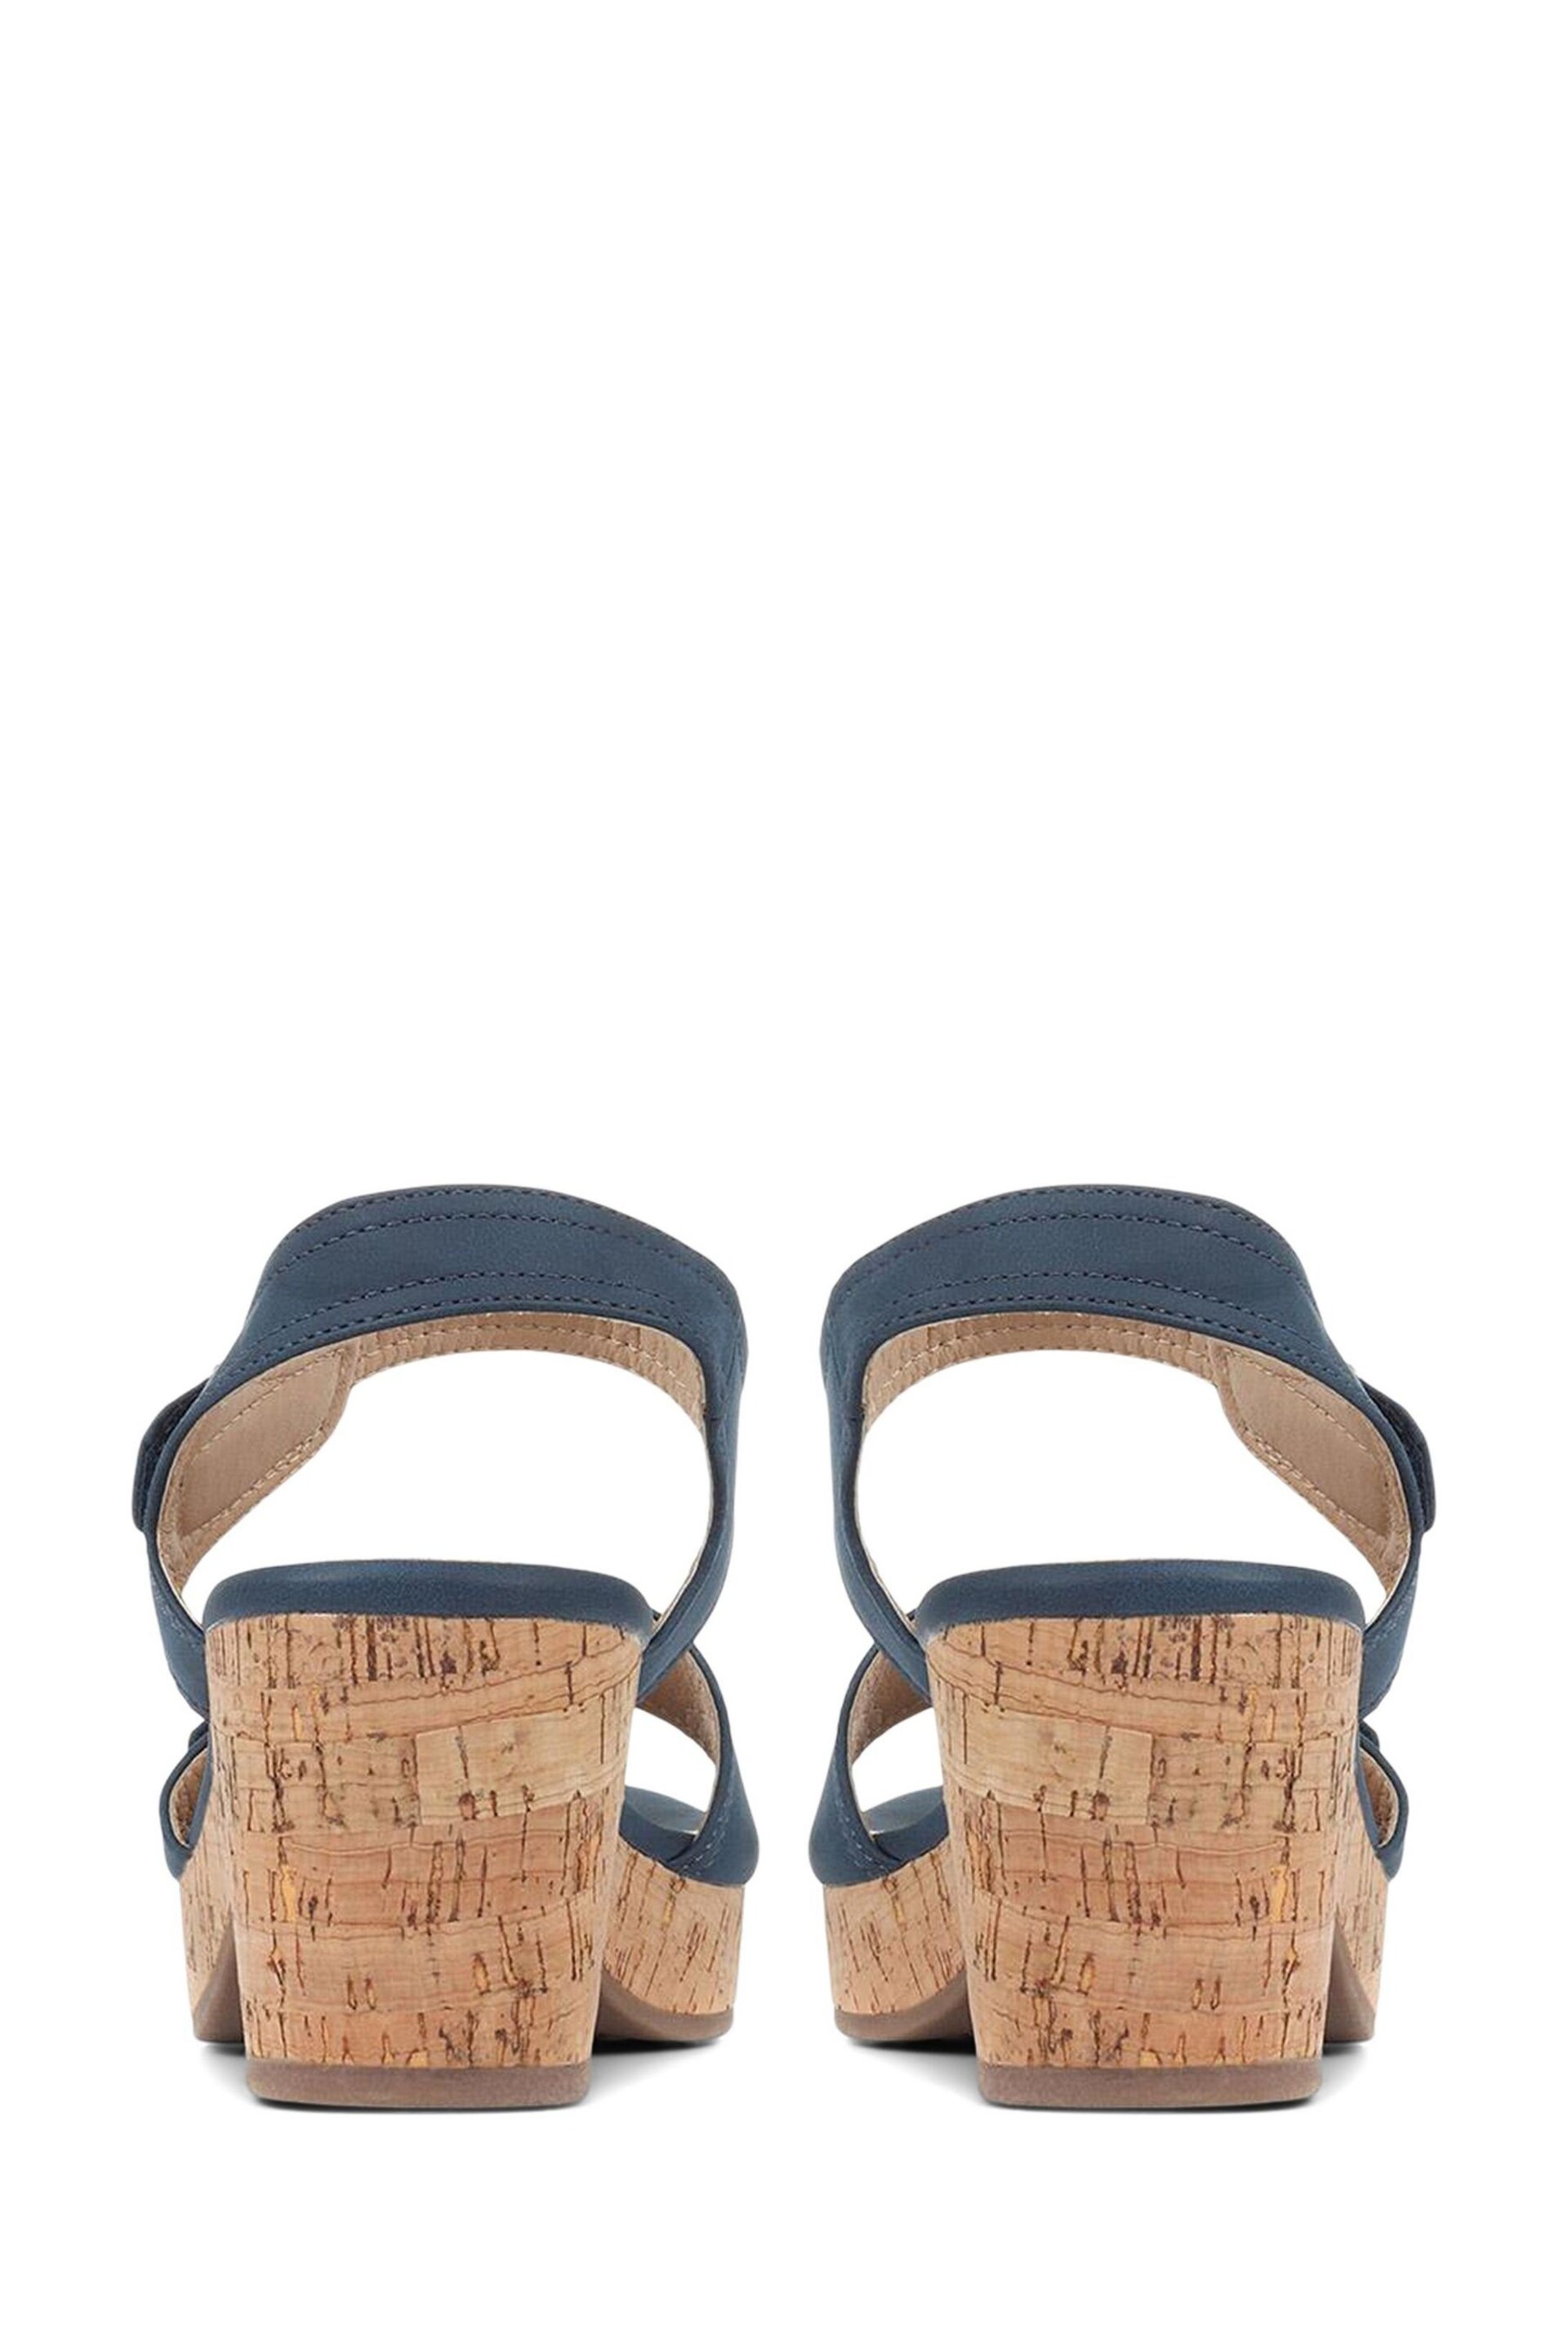 Pavers Strappy Heeled Sandals - Image 6 of 7